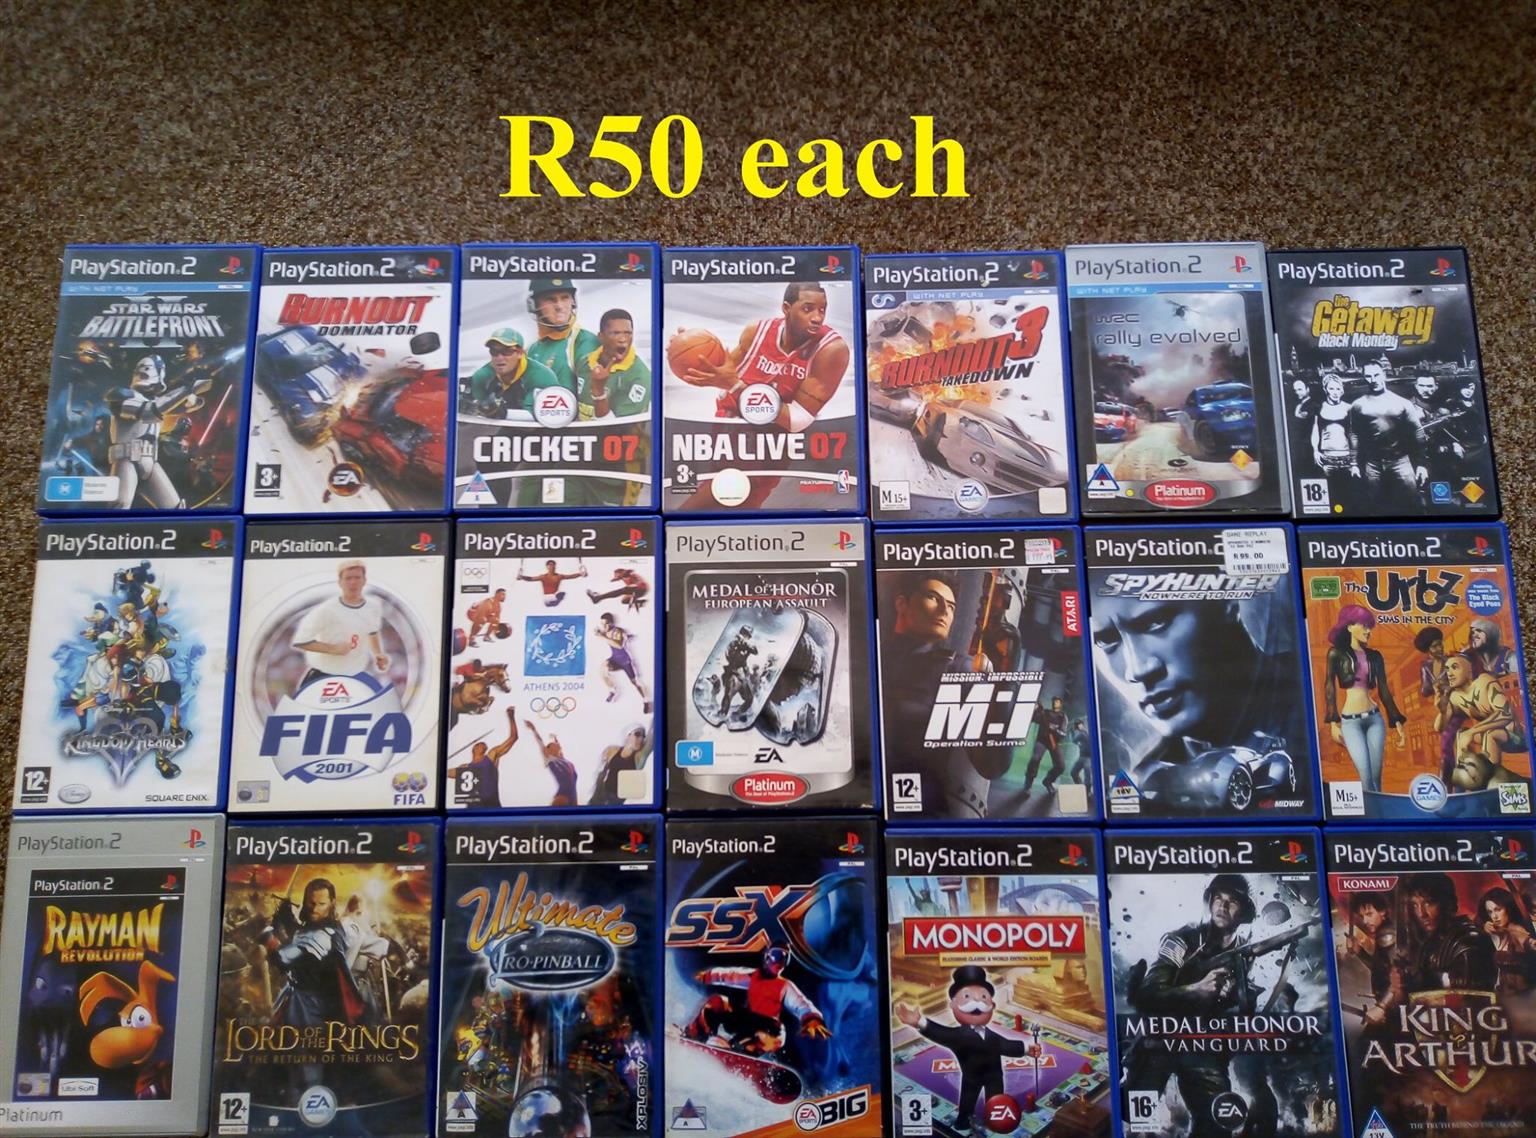 playstation 2 games on sale